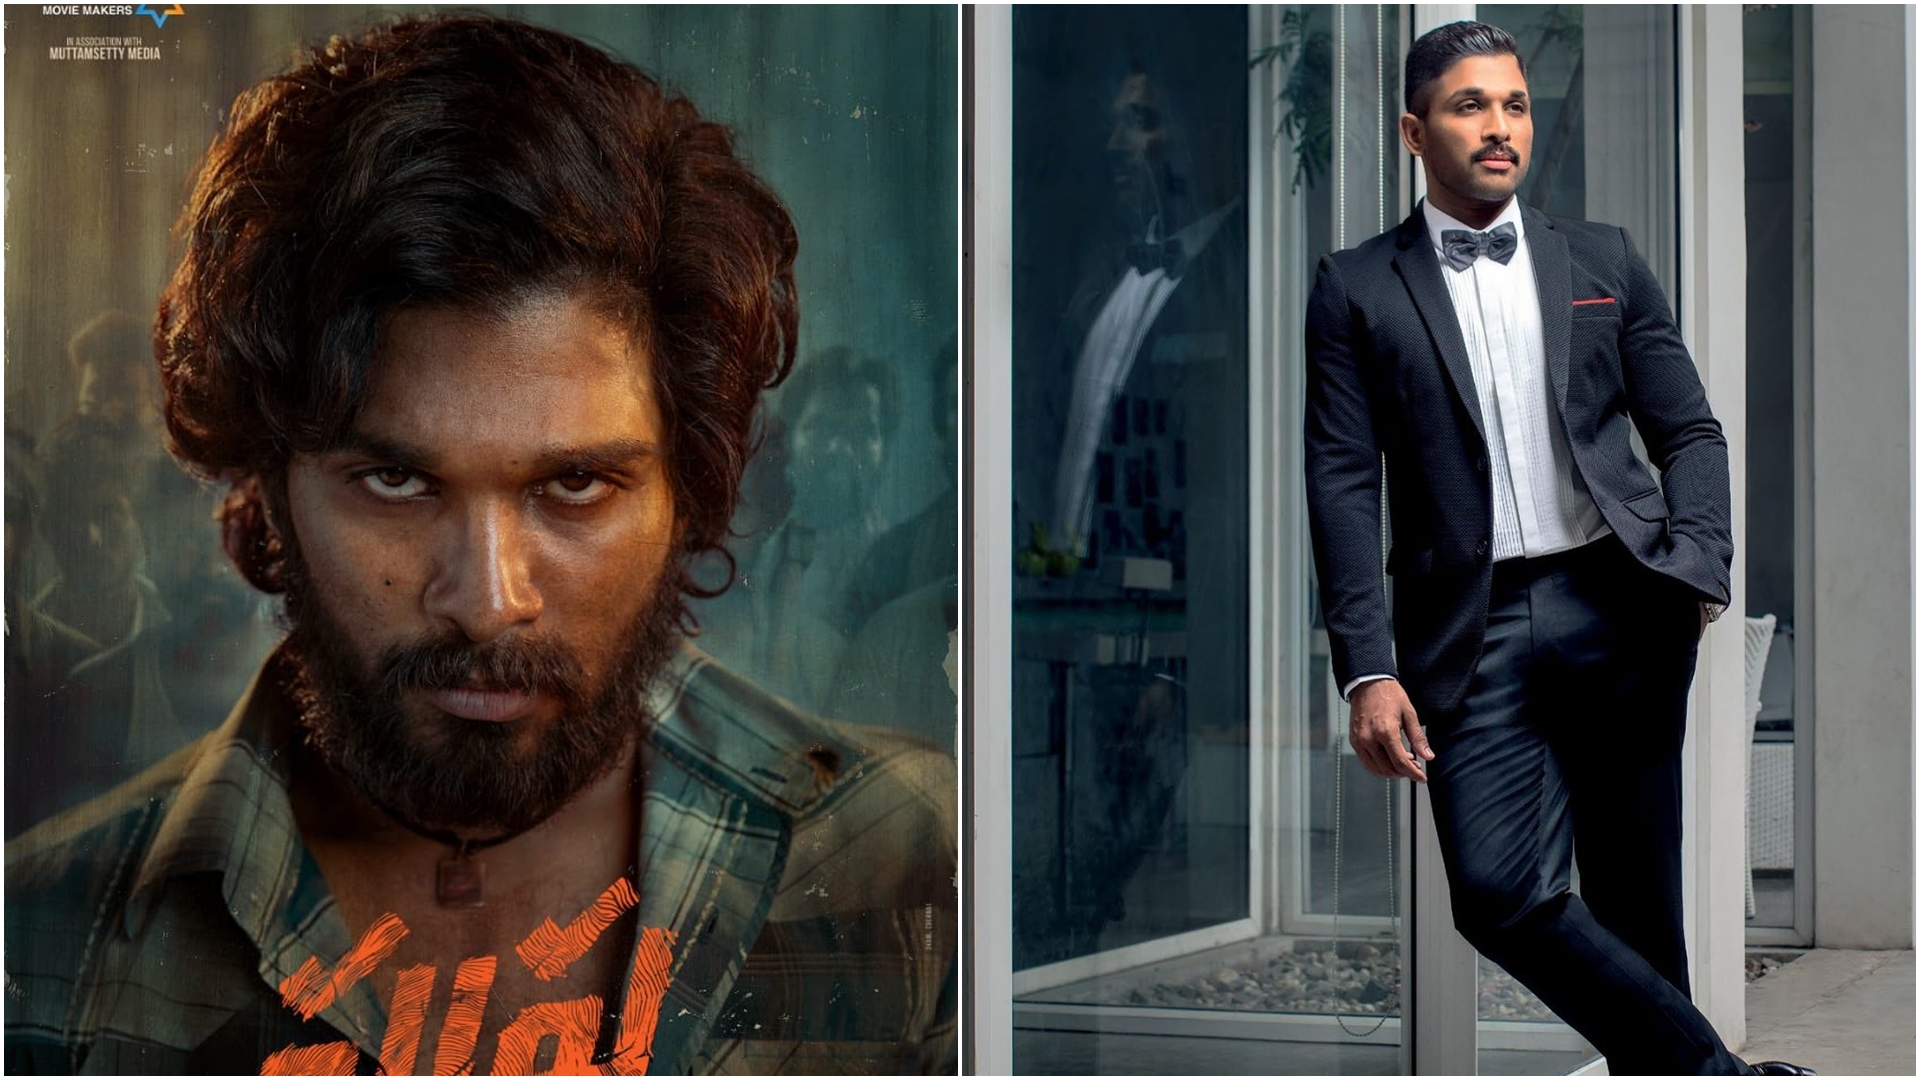 ‘Pushpa’ to be released in 2 parts- Allu Arjun proves he is the stylish actor ever!